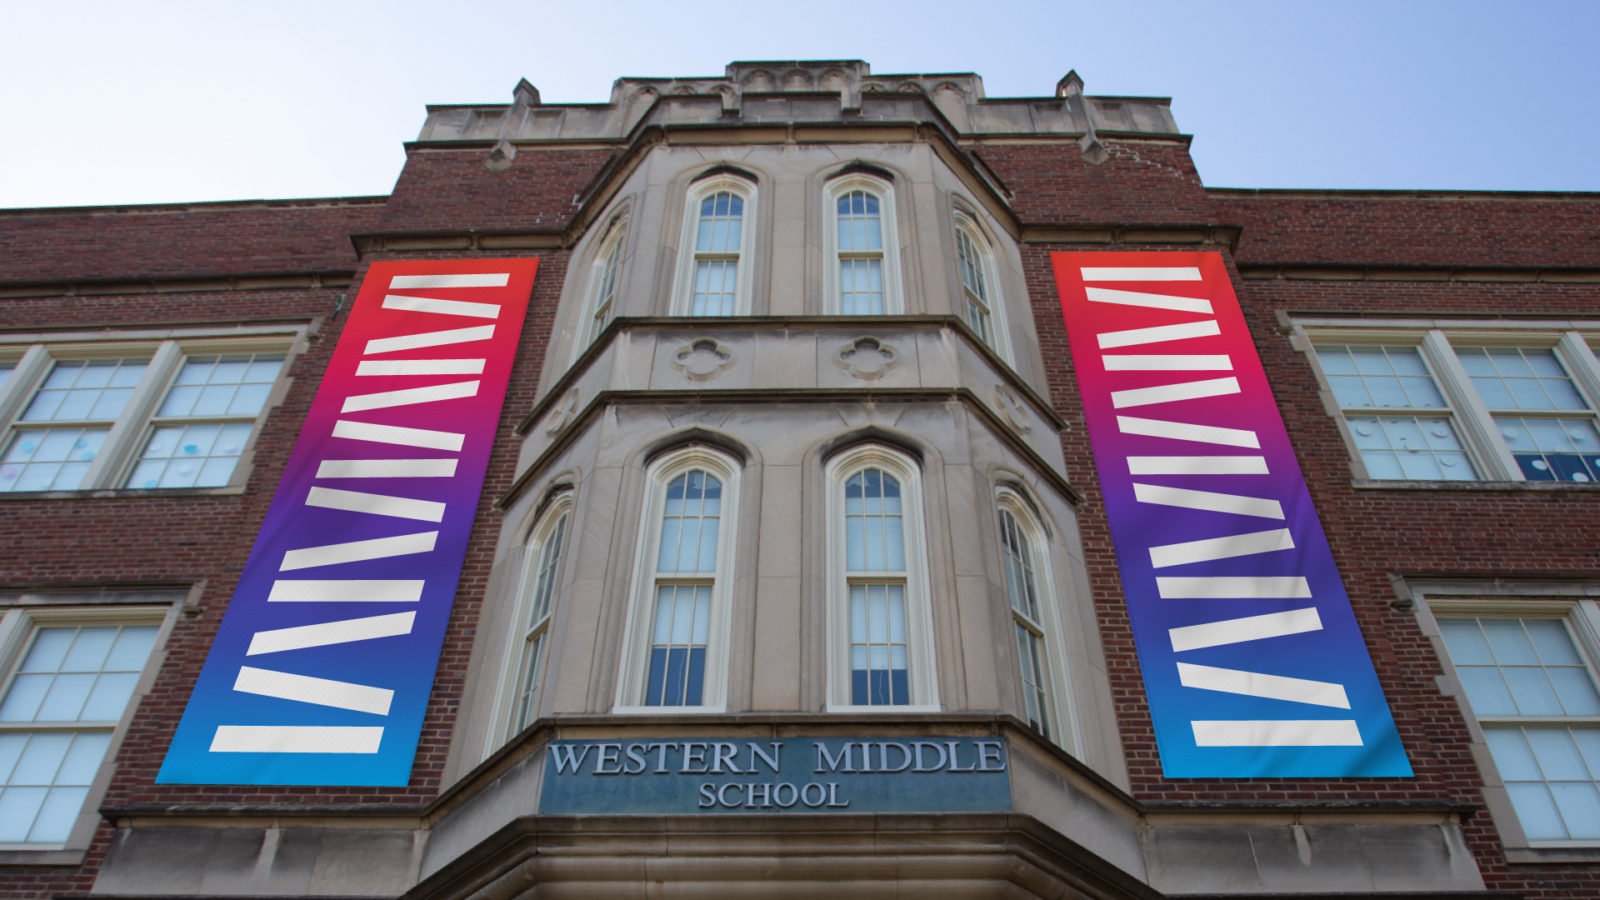 Exterior signage and banners for Western Middle School for the Arts, a Louisville performing arts school